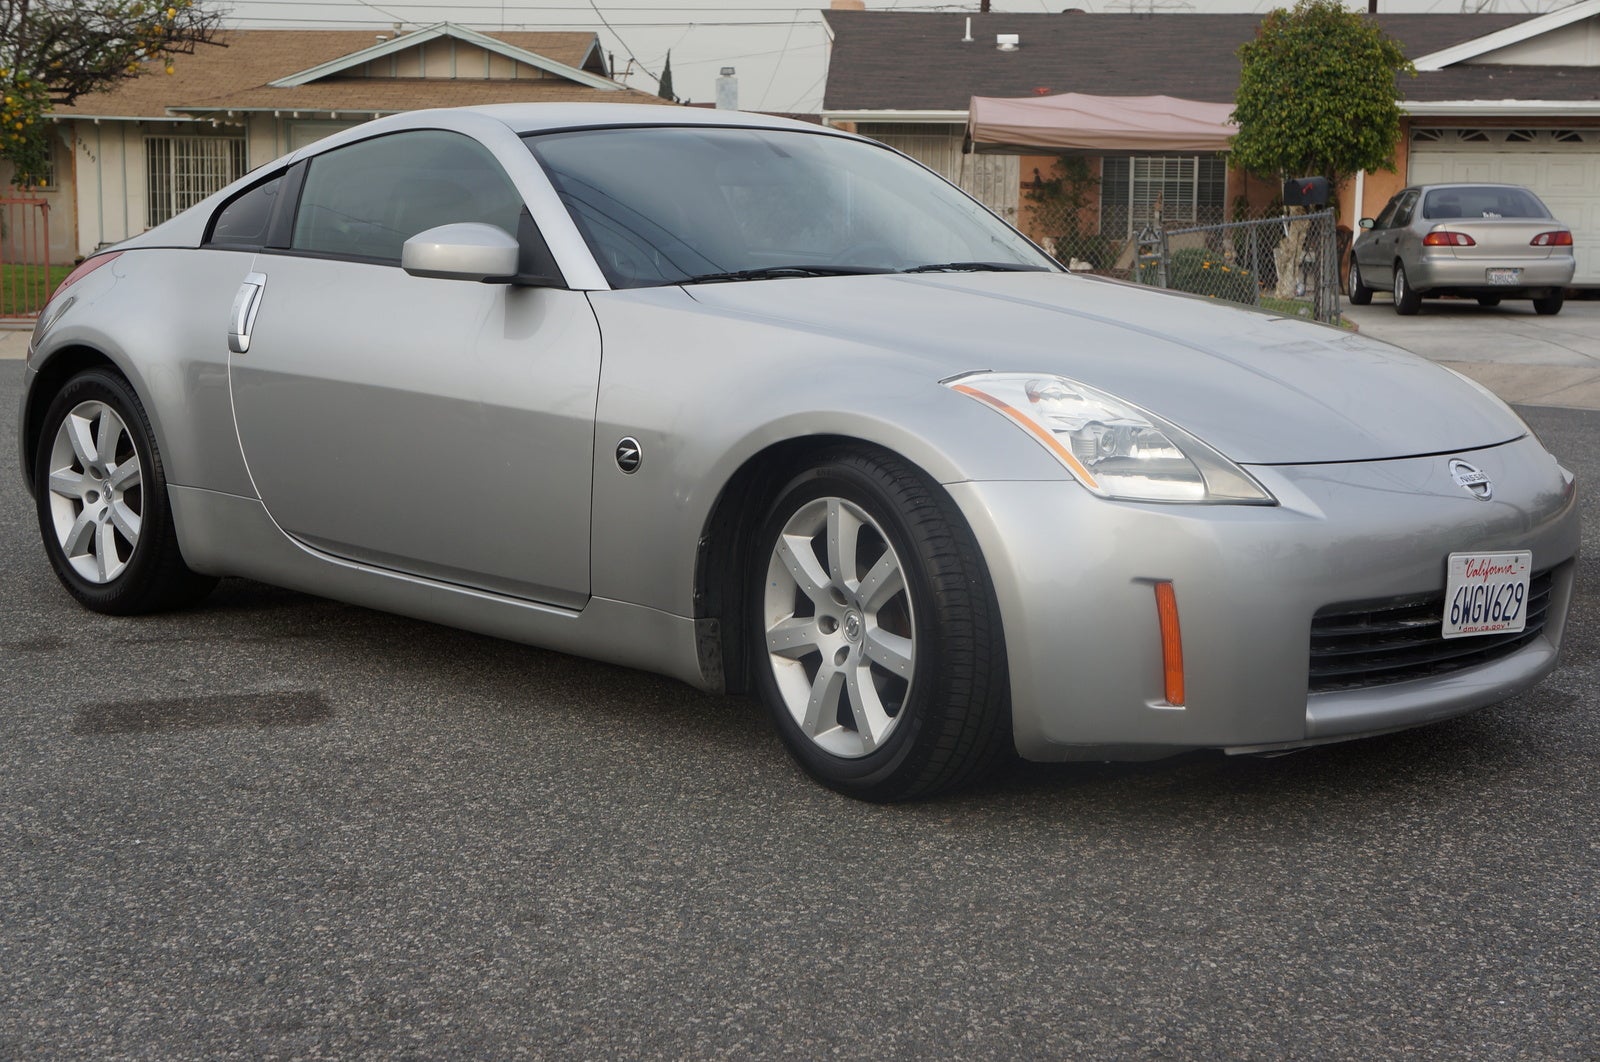 2004 Nissan 350z enthusiast review